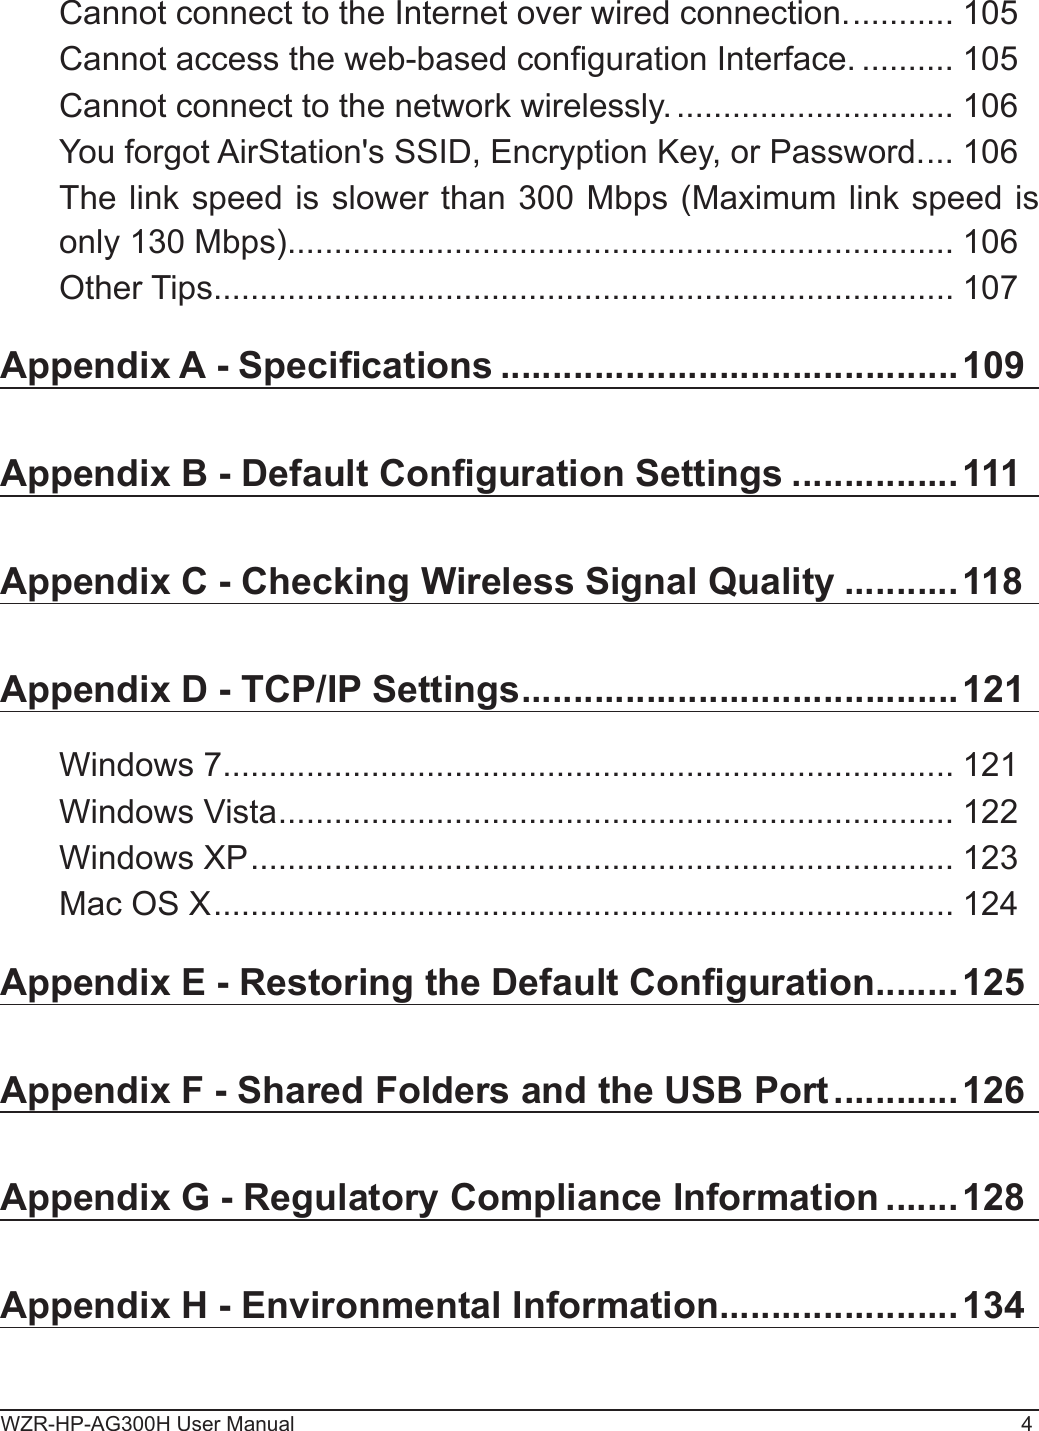 WZR-HP-AG300H User Manual 4Cannot connect to the Internet over wired connection. ........... 105Cannot access the web-based conguration Interface. .......... 105Cannot connect to the network wirelessly. .............................. 106You forgot AirStation&apos;s SSID, Encryption Key, or Password. ... 106The link speed is slower than 300 Mbps (Maximum link speed is only 130 Mbps). ....................................................................... 106Other Tips ................................................................................ 107Appendix A - Specications ............................................109Appendix B - Default Conguration Settings ................111Appendix C - Checking Wireless Signal Quality ...........118Appendix D - TCP/IP Settings ..........................................121Windows 7 ............................................................................... 121Windows Vista ......................................................................... 122Windows XP ............................................................................ 123Mac OS X ................................................................................ 124Appendix E - Restoring the Default Conguration ........125Appendix F - Shared Folders and the USB Port ............126Appendix G - Regulatory Compliance Information .......128Appendix H - Environmental Information .......................134